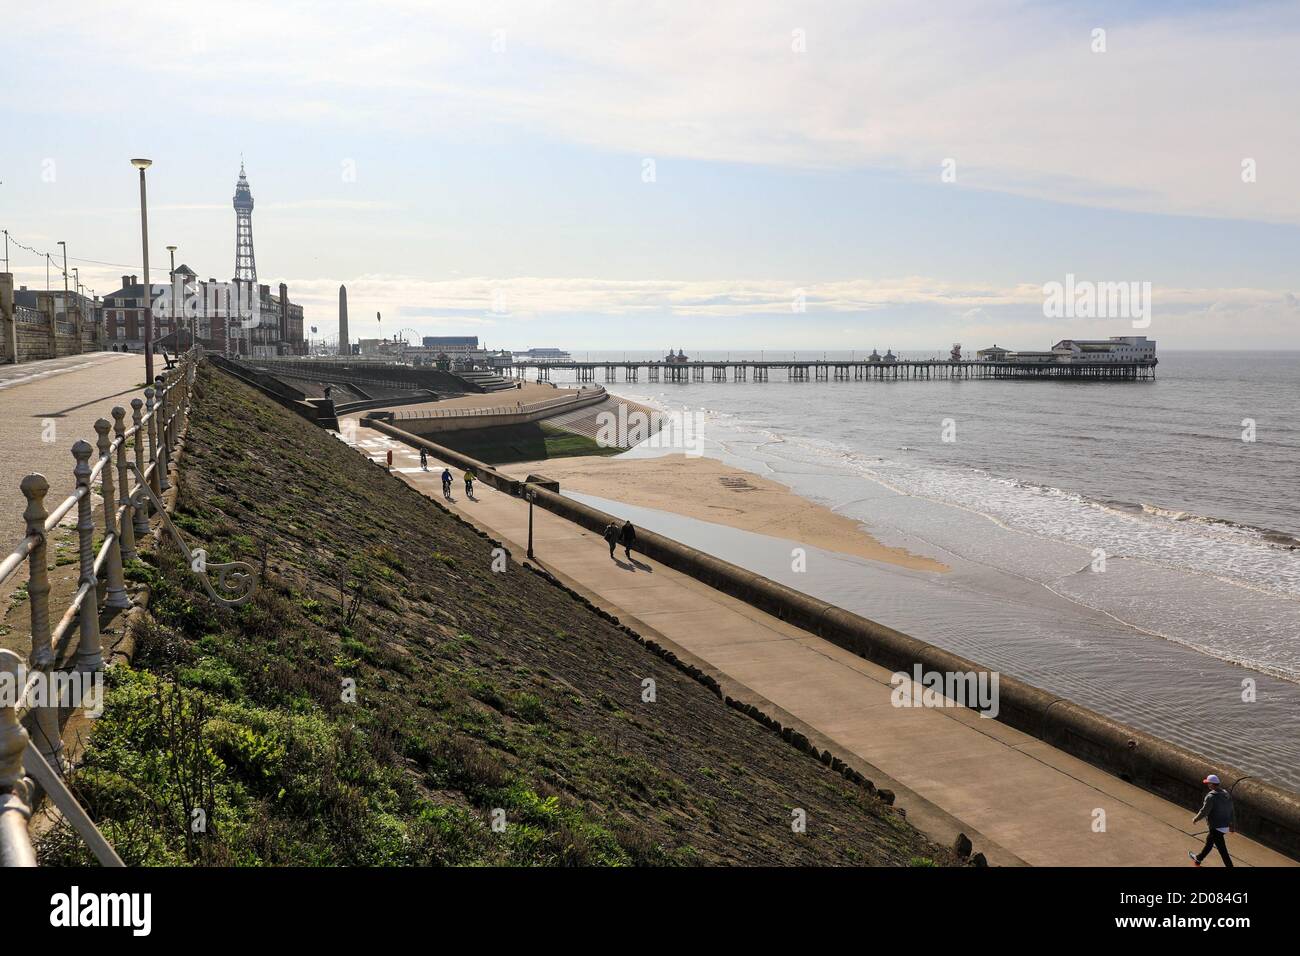 Promenade on the seafront with the Tower and North Pier in the background at Blackpool, Lancashire, England, UK Stock Photo